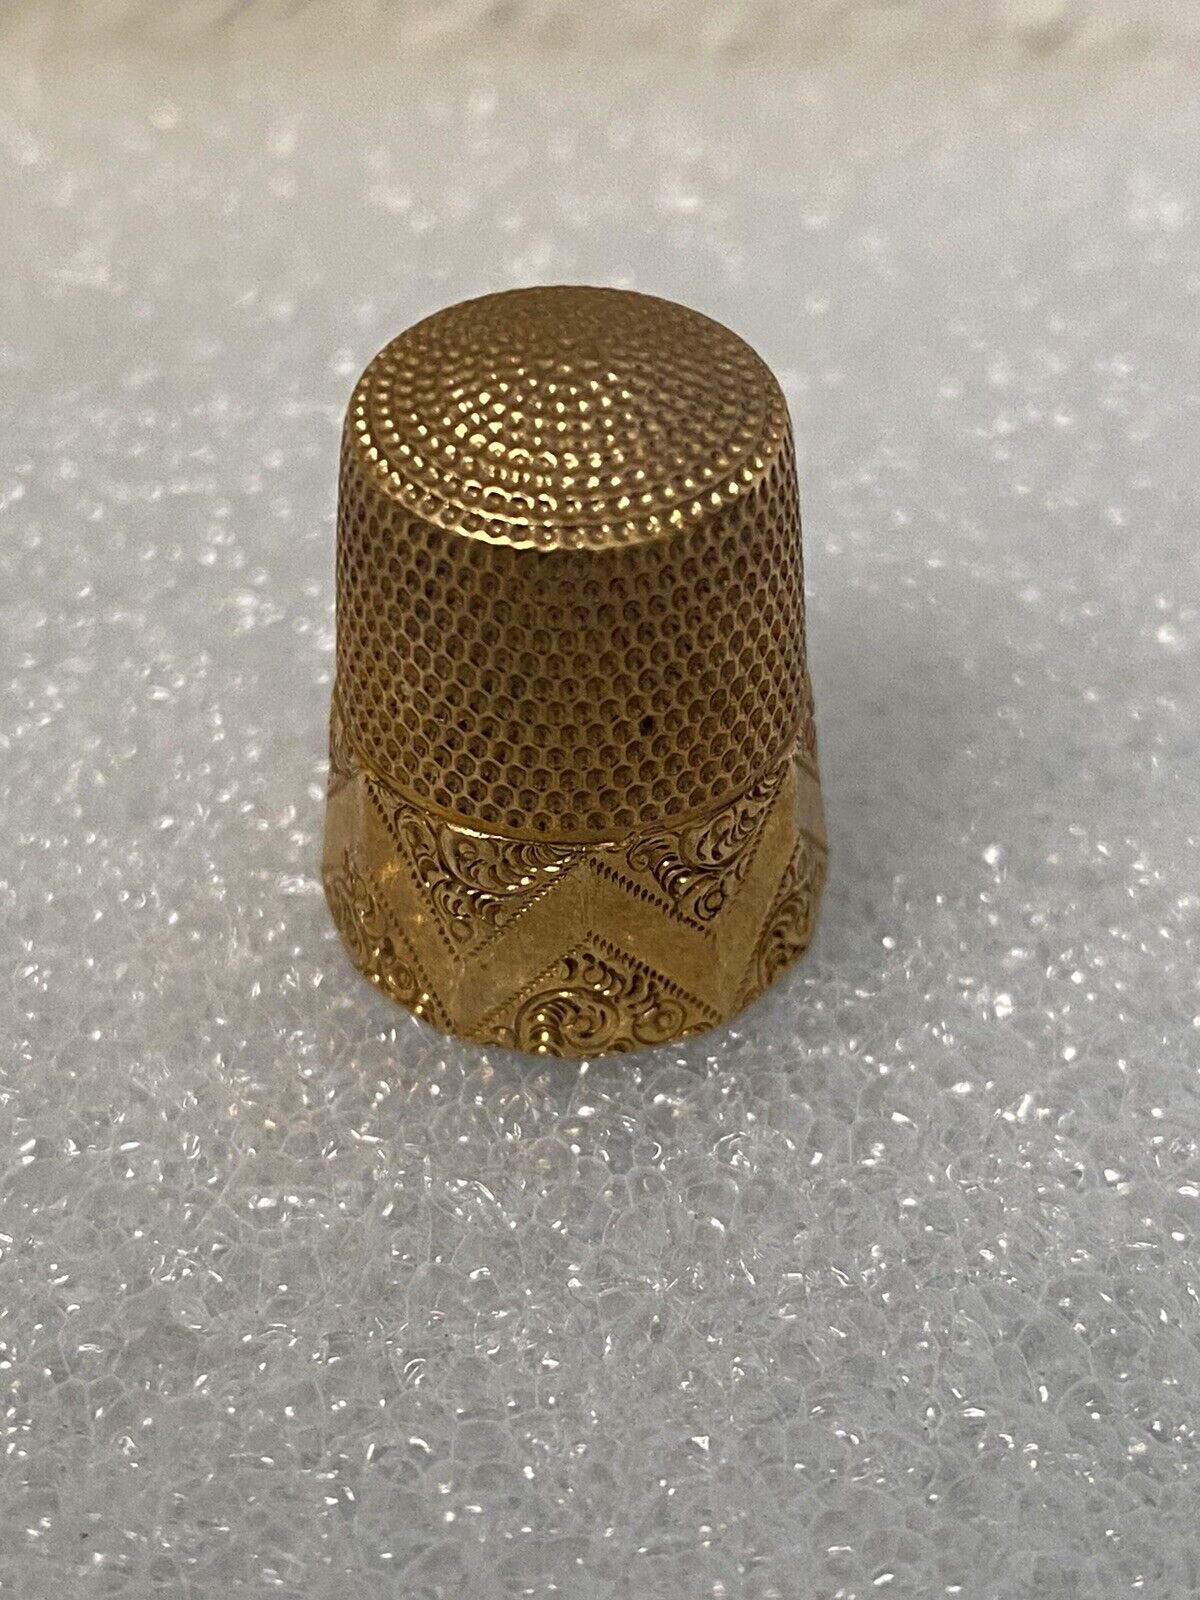 Antique 14K Gold Thimble Ornate Engraving RARE with Display Box Orig Receipt